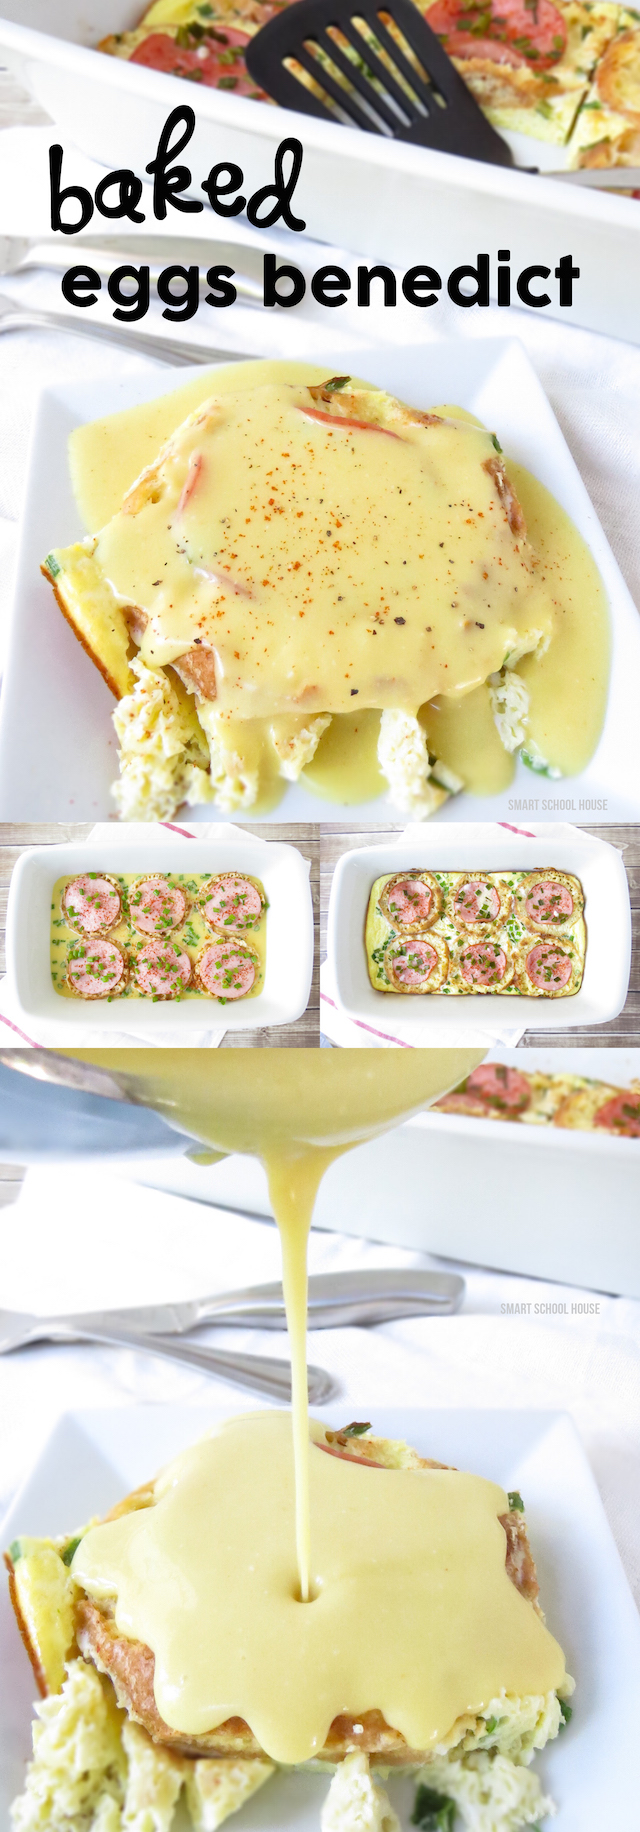 How to make Baked Eggs Benedict for breakfast - The EASIEST way to make eggs benedict ever! A no fuss, no fail recipe that is ready in minutes. Everybody LOVED this!!!